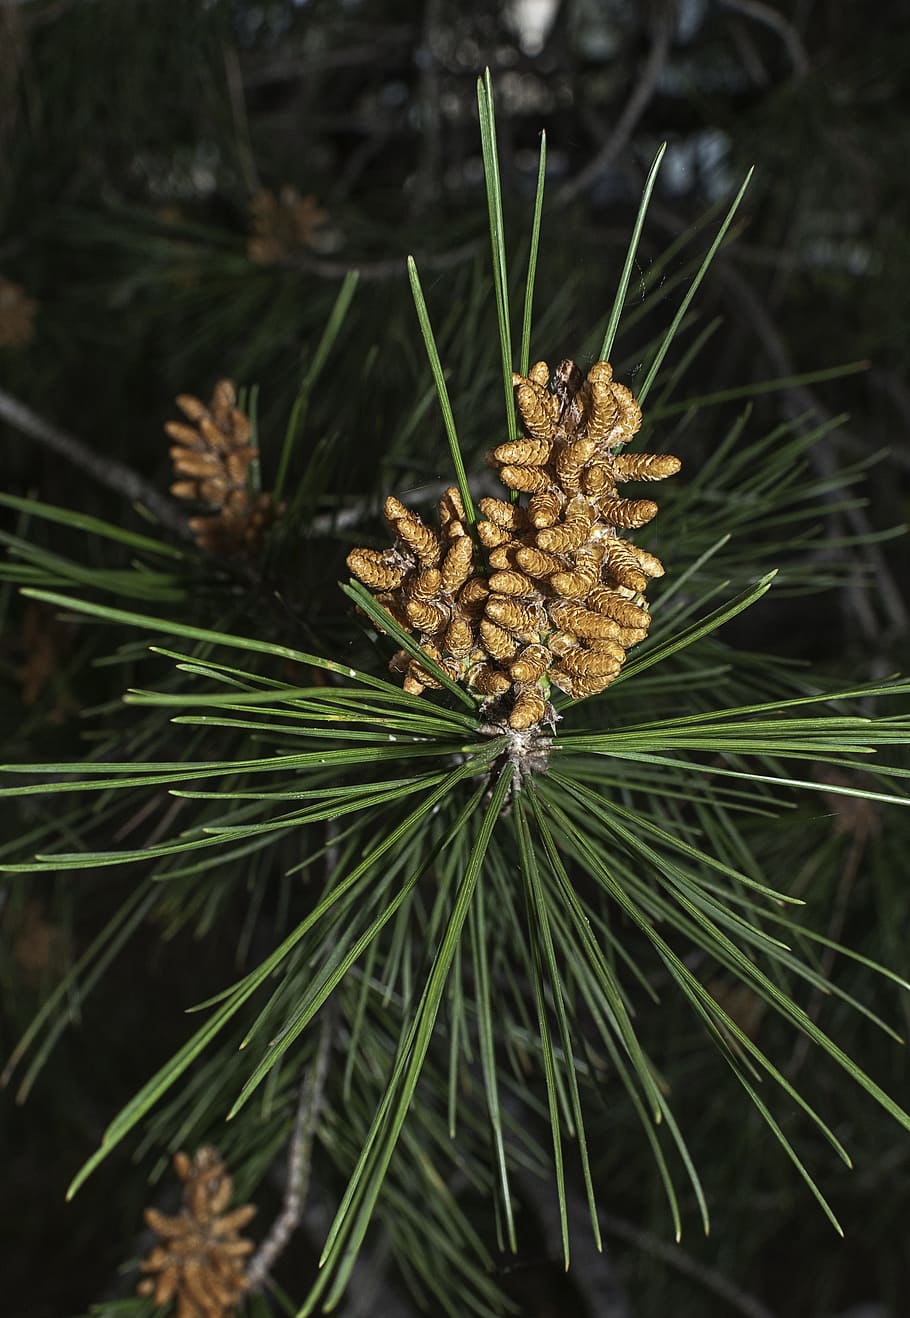 pine, tree, nature, green, pineapple, trees, forest, needles, leaves, branch